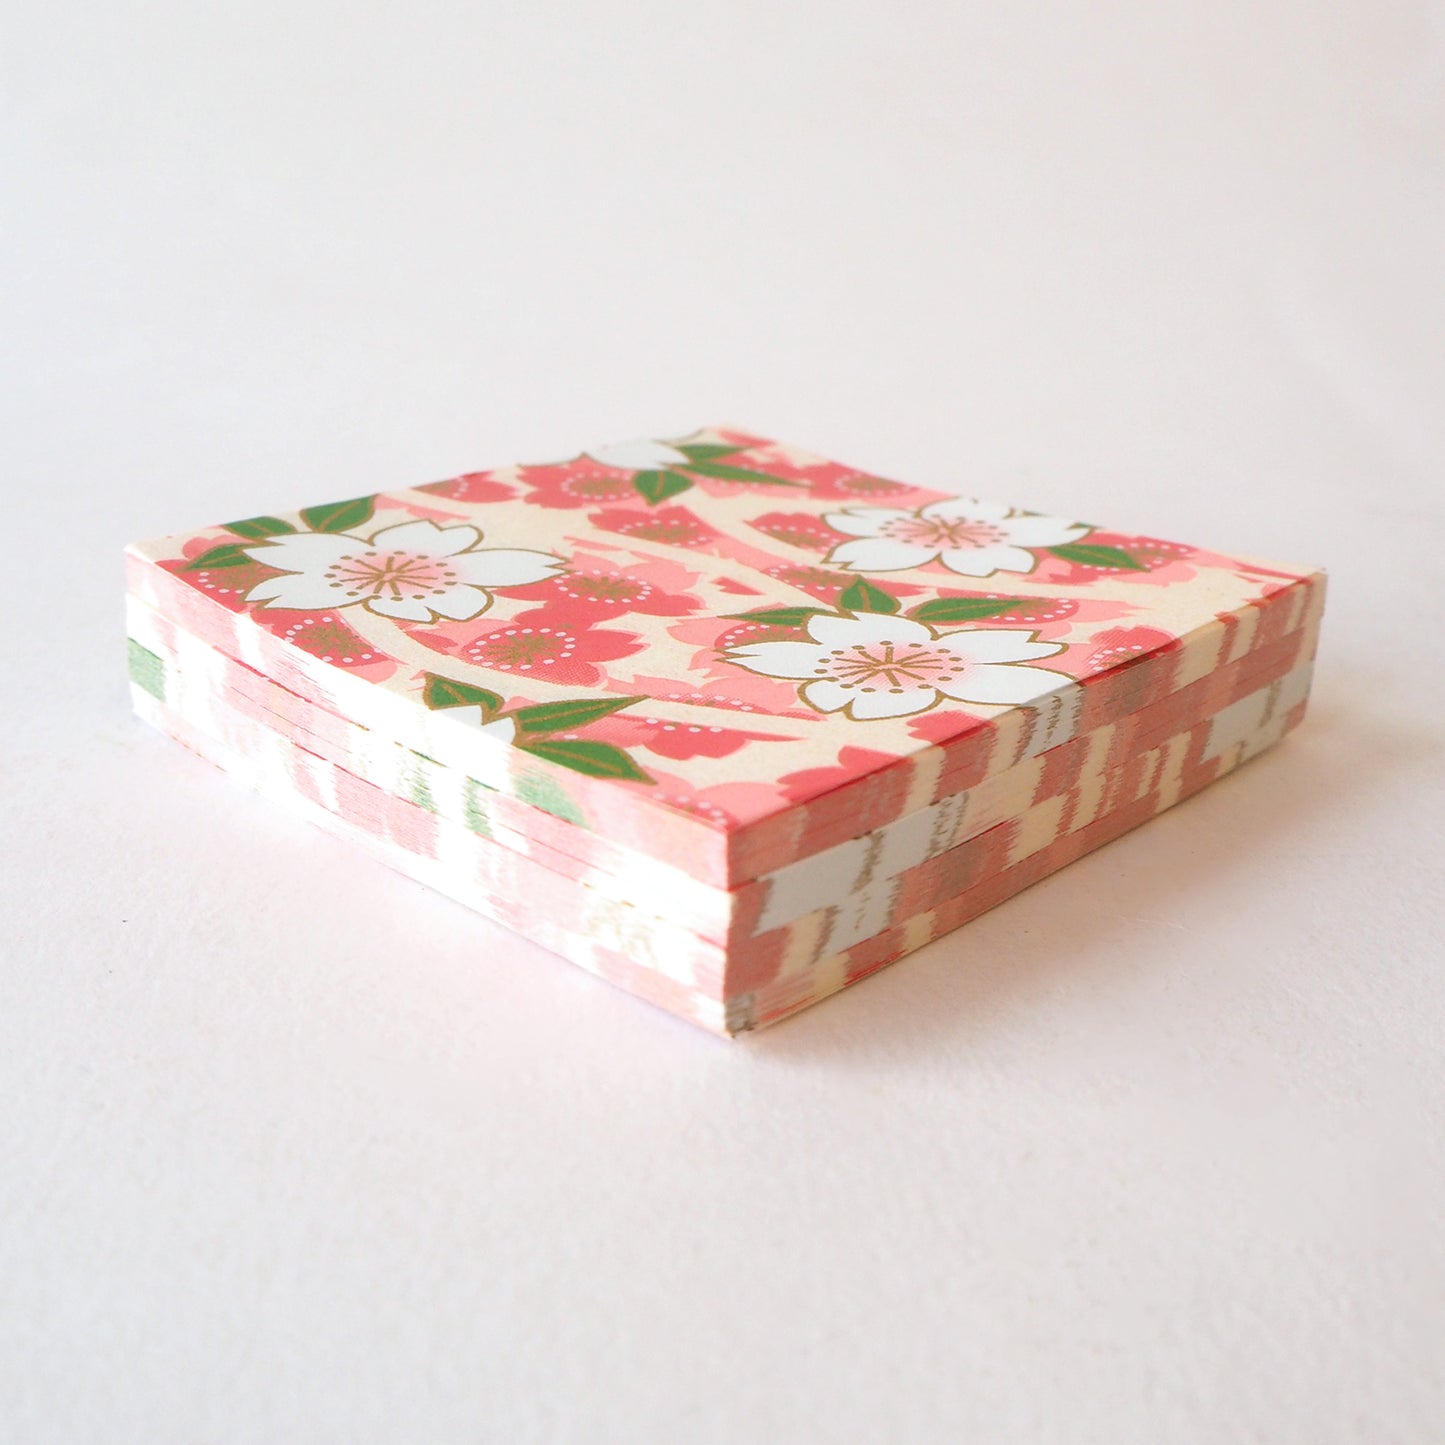 Pack of 100 Sheets 7x7cm Yuzen Washi Origami Paper HZ-412 - Big Cherry Blossom Pink - washi paper - Lavender Home London